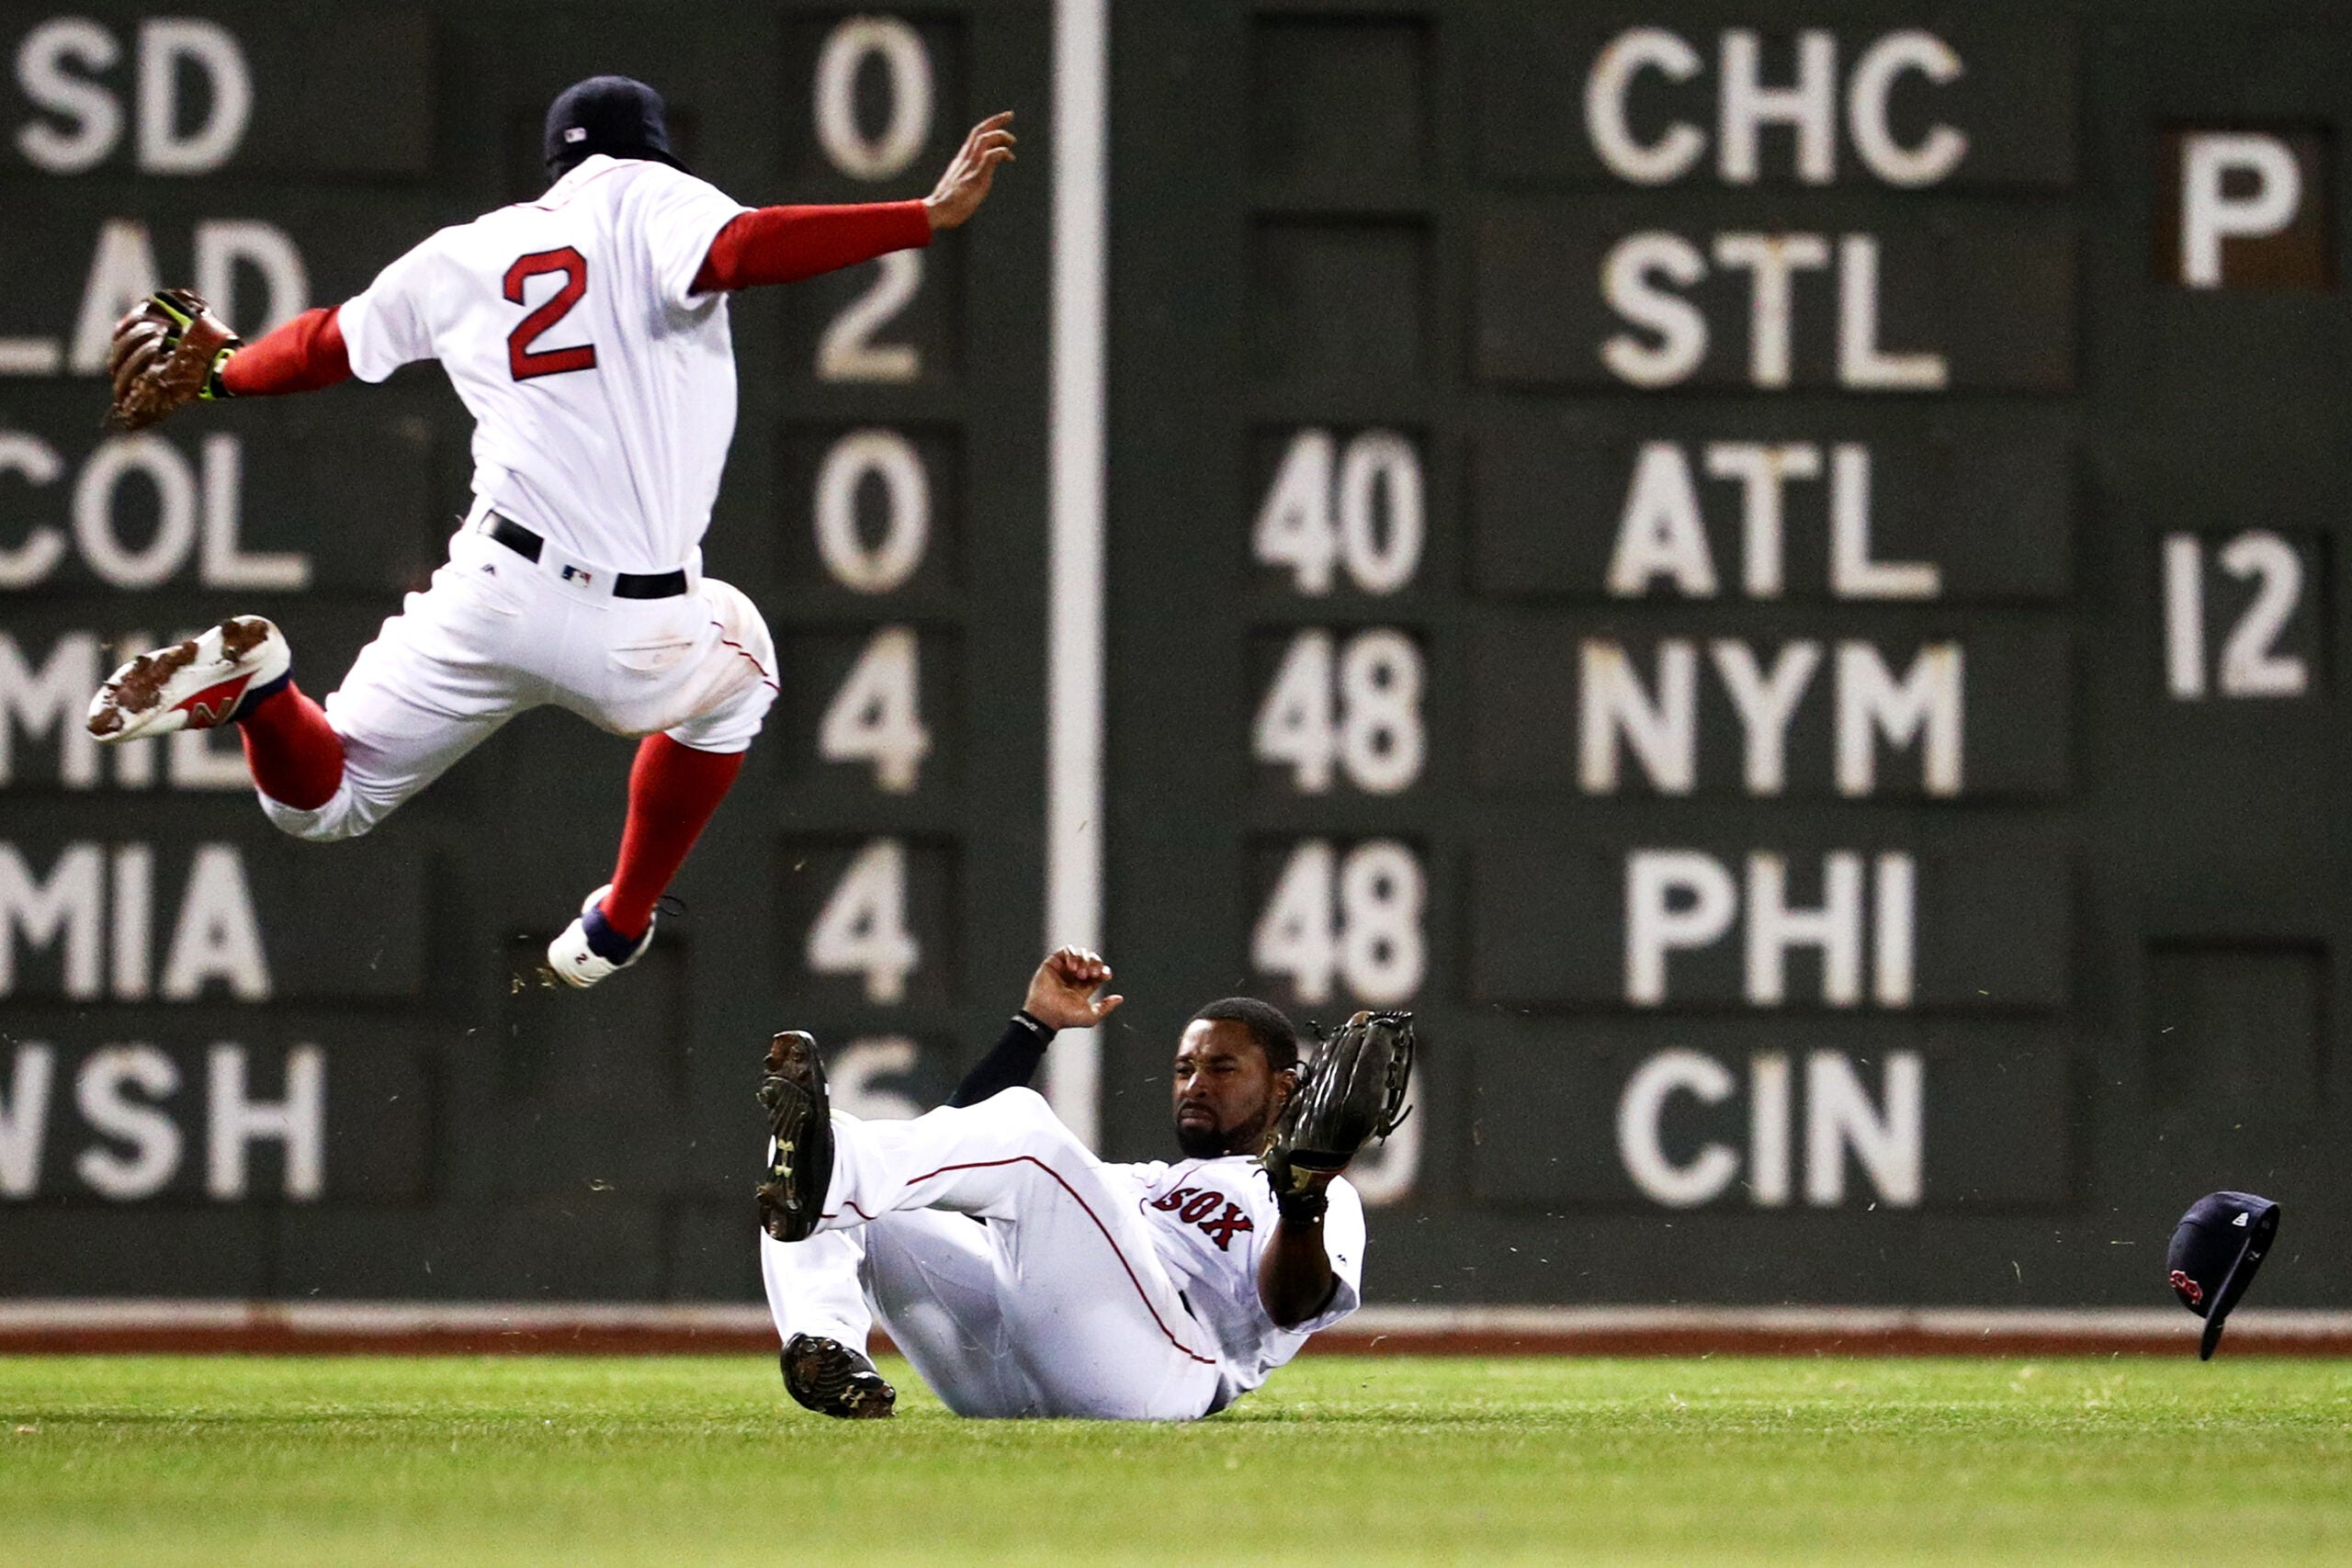 Jackie Bradley Jr. unleashed an insane 11th inning throw to save